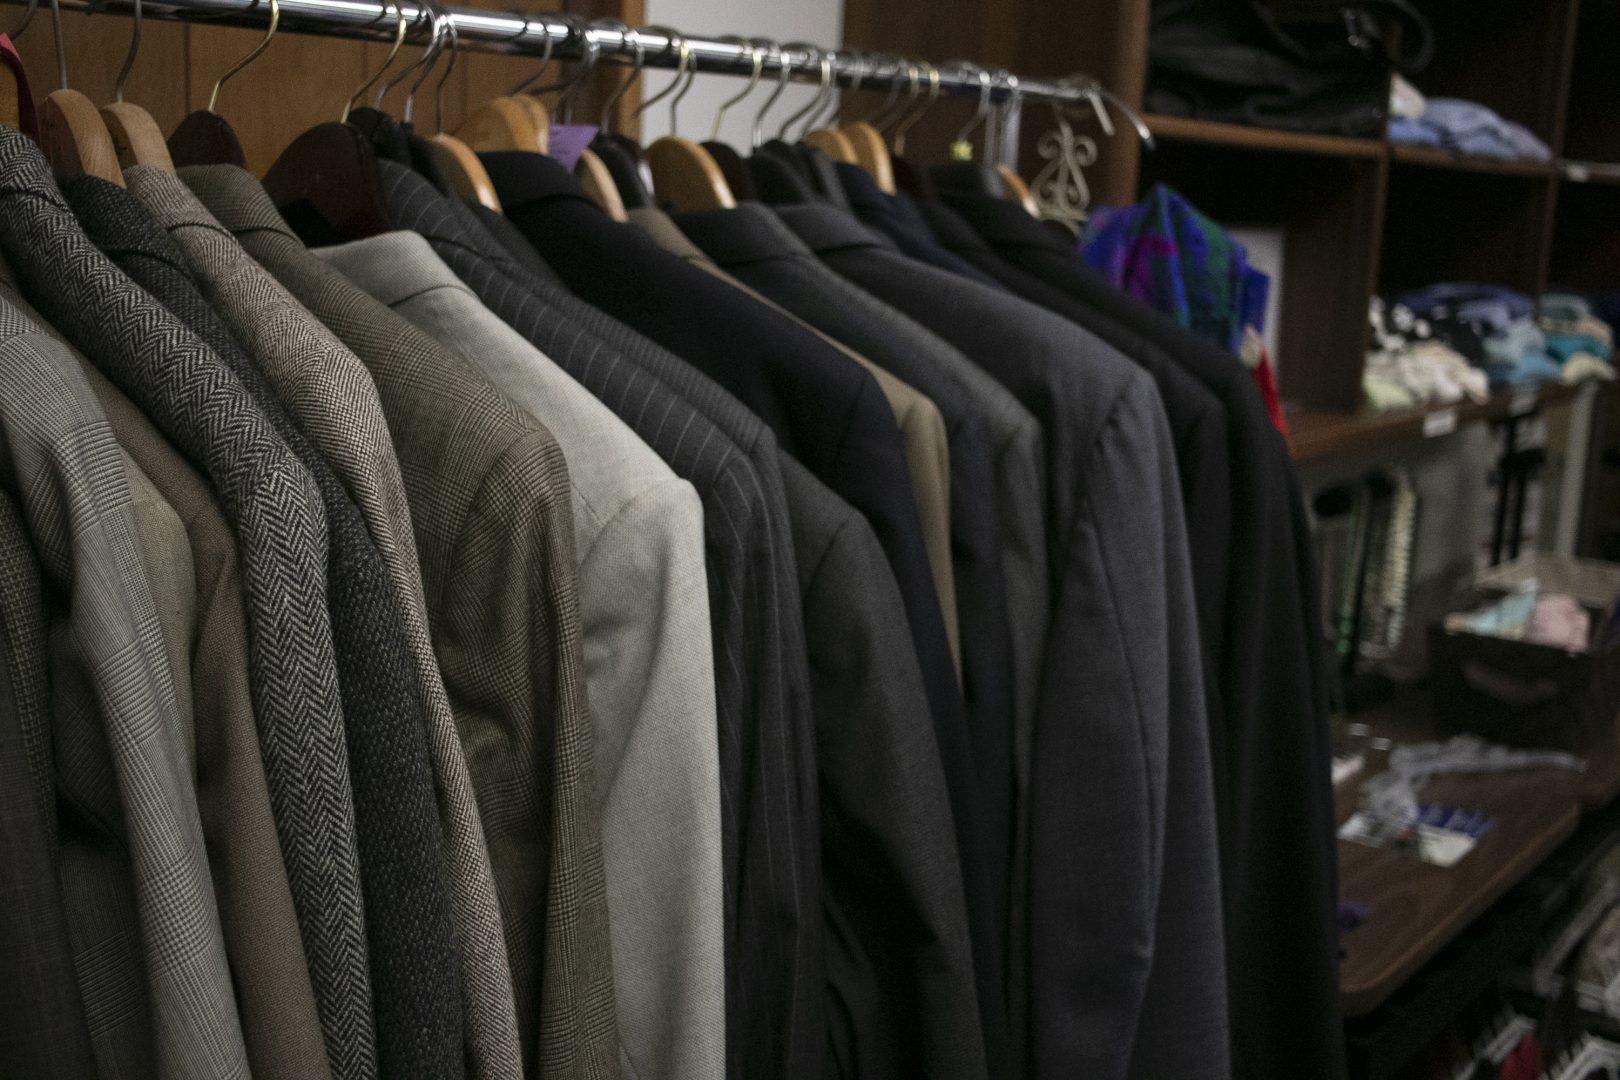 A+rack+of+coats+displayed+at+the+Clothing+Closet.+The+Clothing+Closet%2C+located+in+the+Frank+W.+Thomas+Building%2C+provides+students+with+free+professional+attire.+%28Larry+Valenzuela%2F+The+Collegian%29